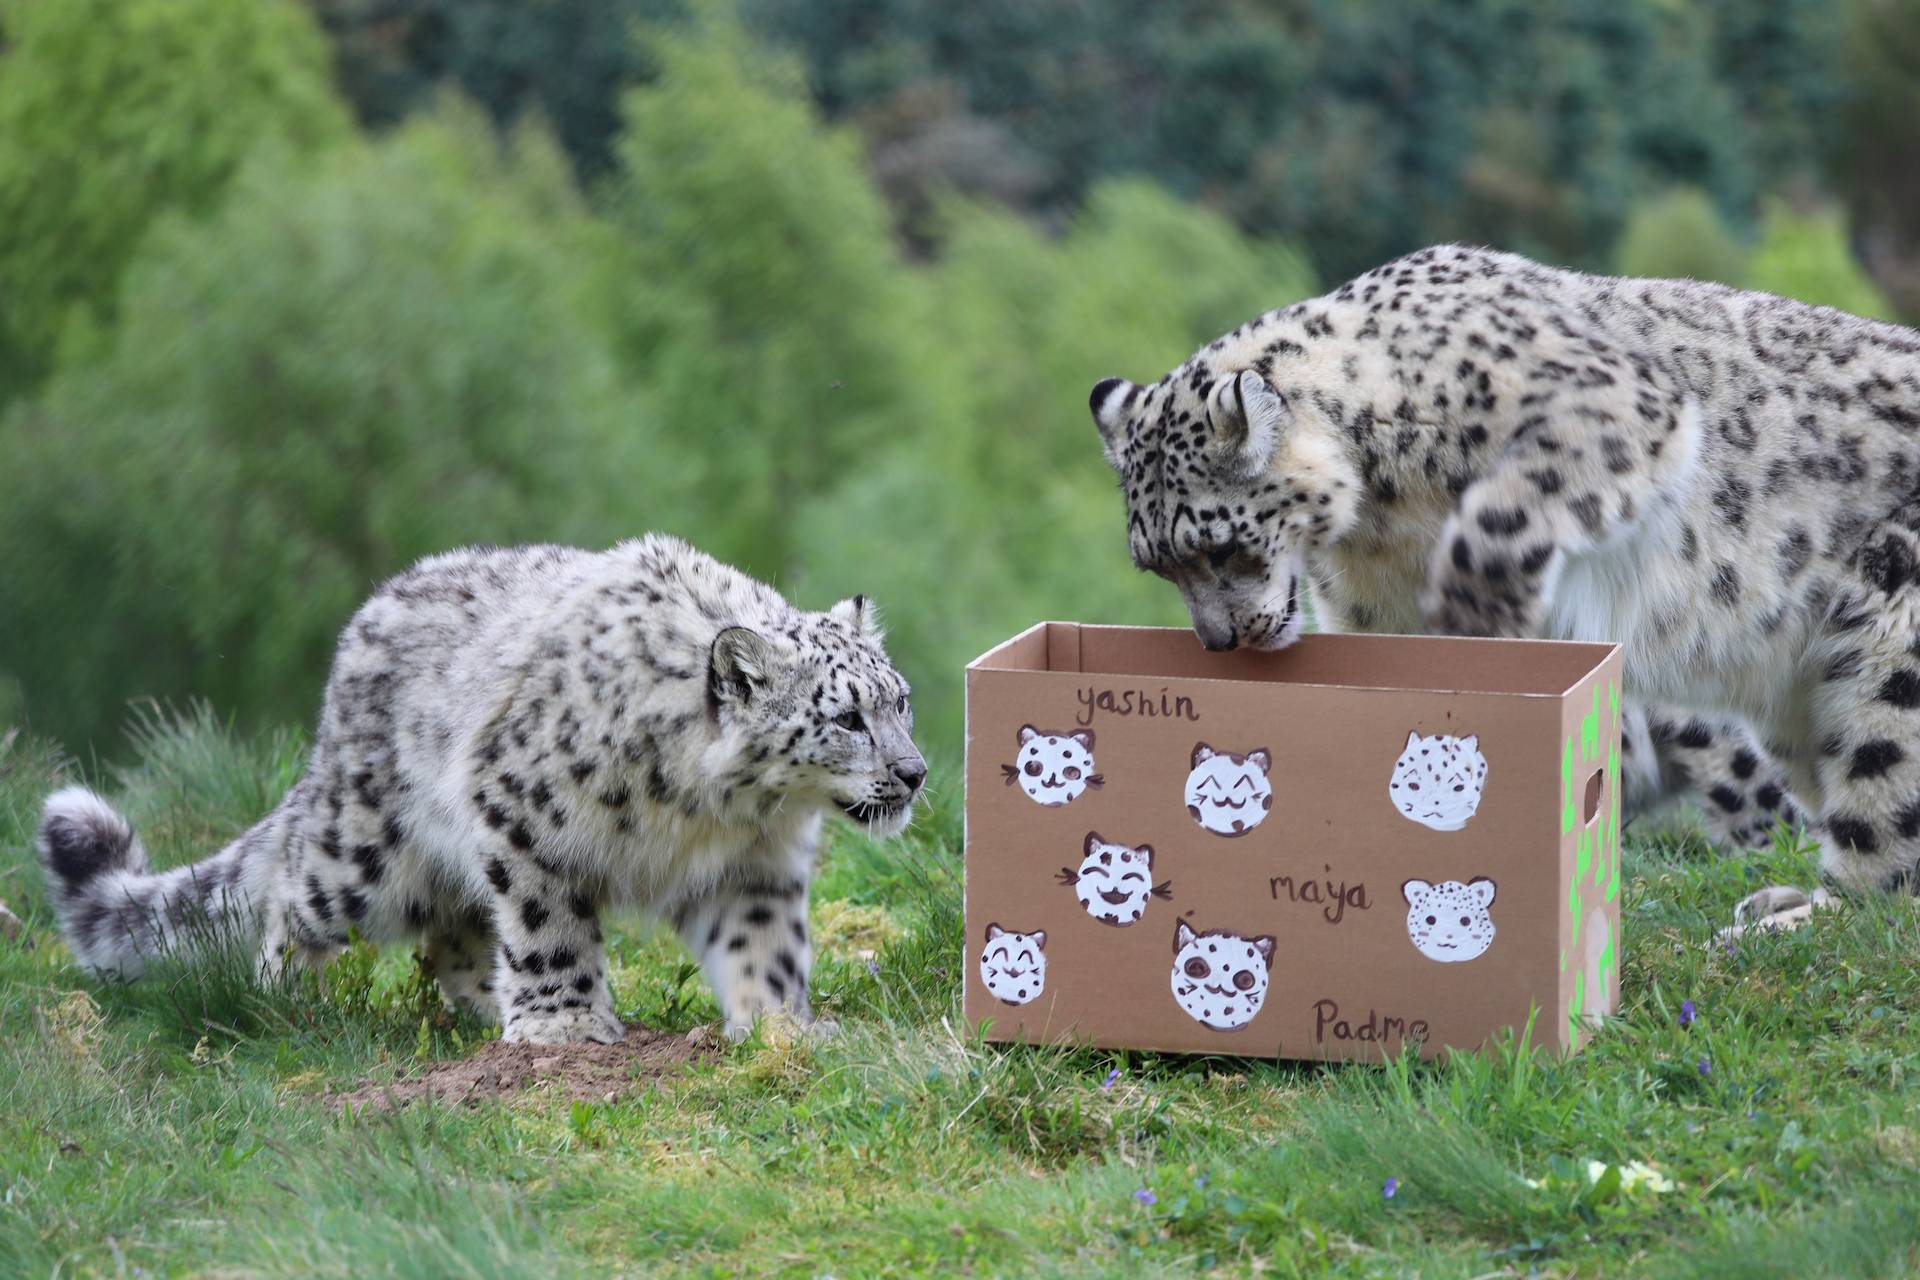 Snow leopard cubs Maya, Yashin and Padme playing with birthday box to celebrate turning one

Image: AMY MIDDLETON 2023